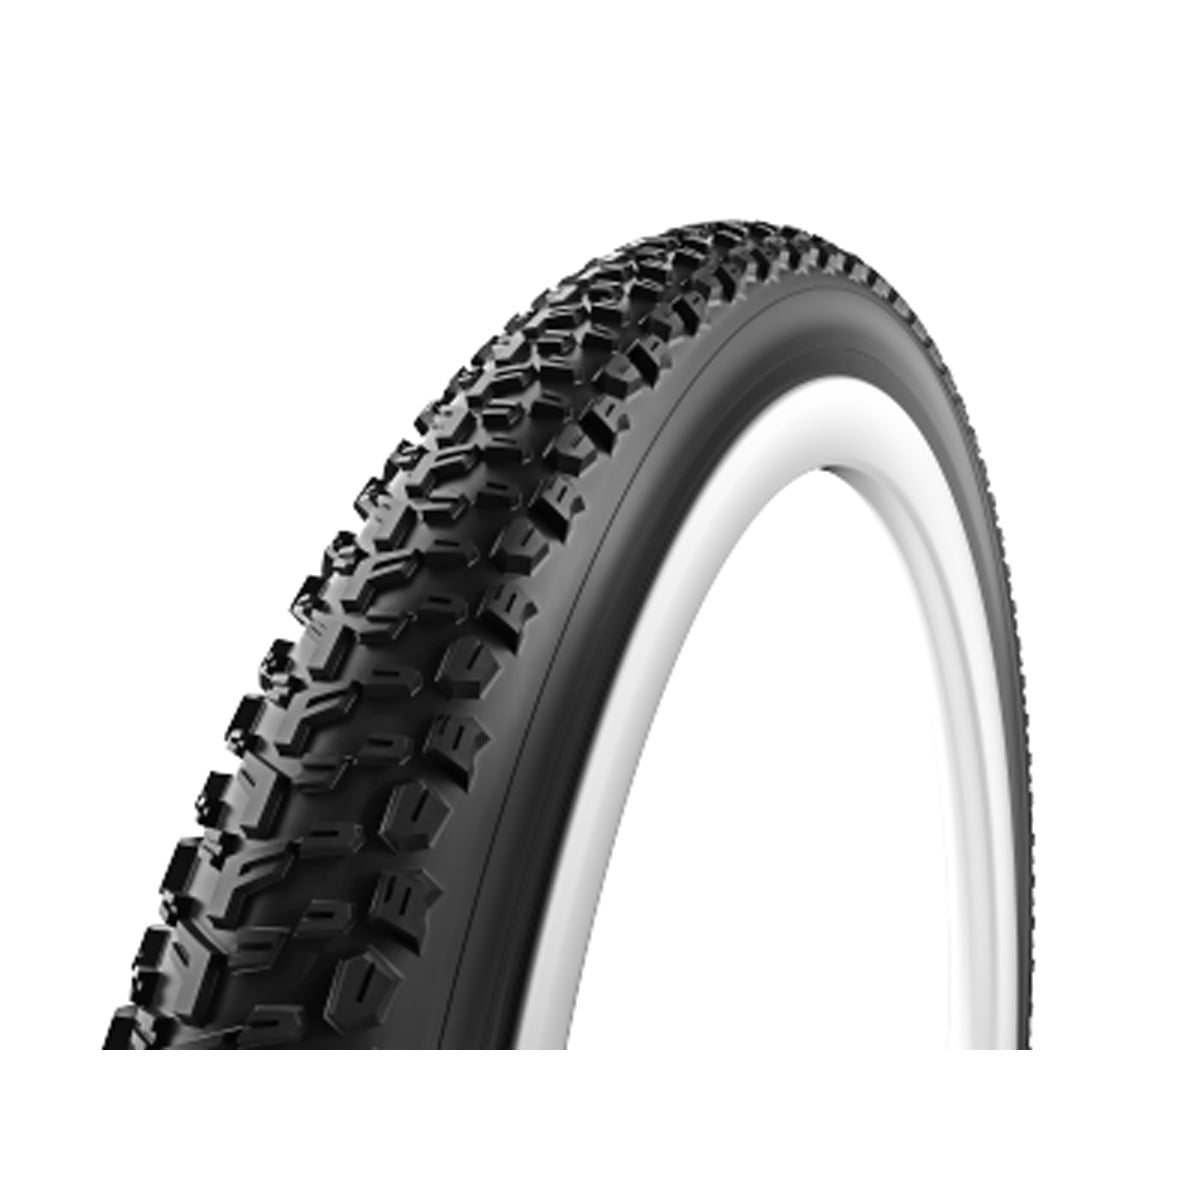 2-PACK Continental Contact Urban Bicycle Tire 27.5 x 1.60 PAIR 